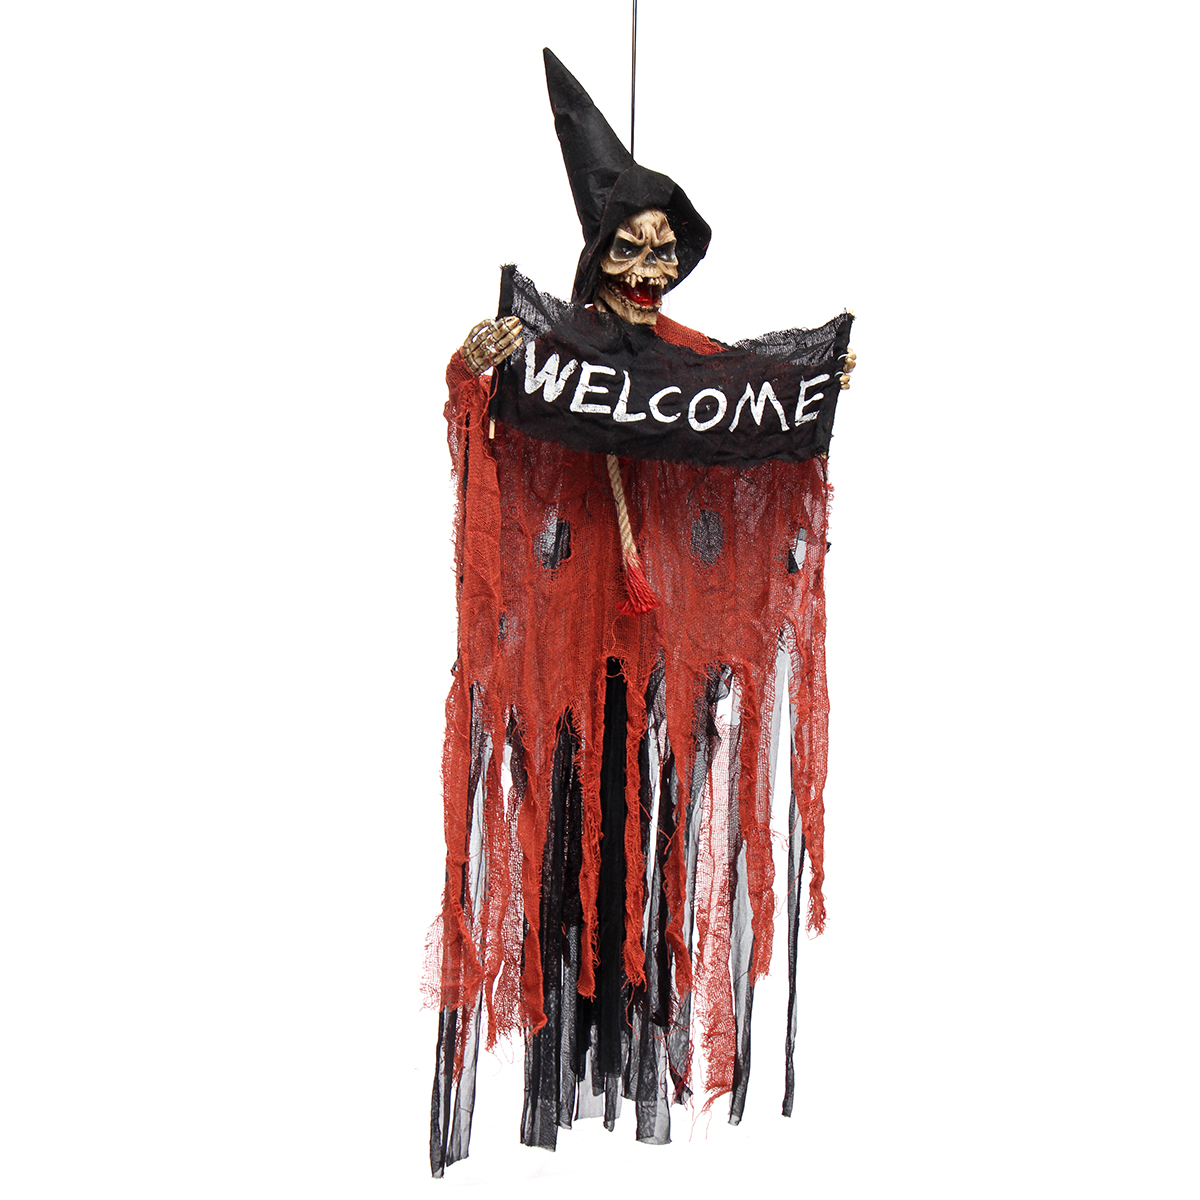 Halloween-Tools-Scary-Welcome-Sign-Hanging-Skeleton-Voice-Lights-Eyes-for-Halloween-Decorations-1340873-8